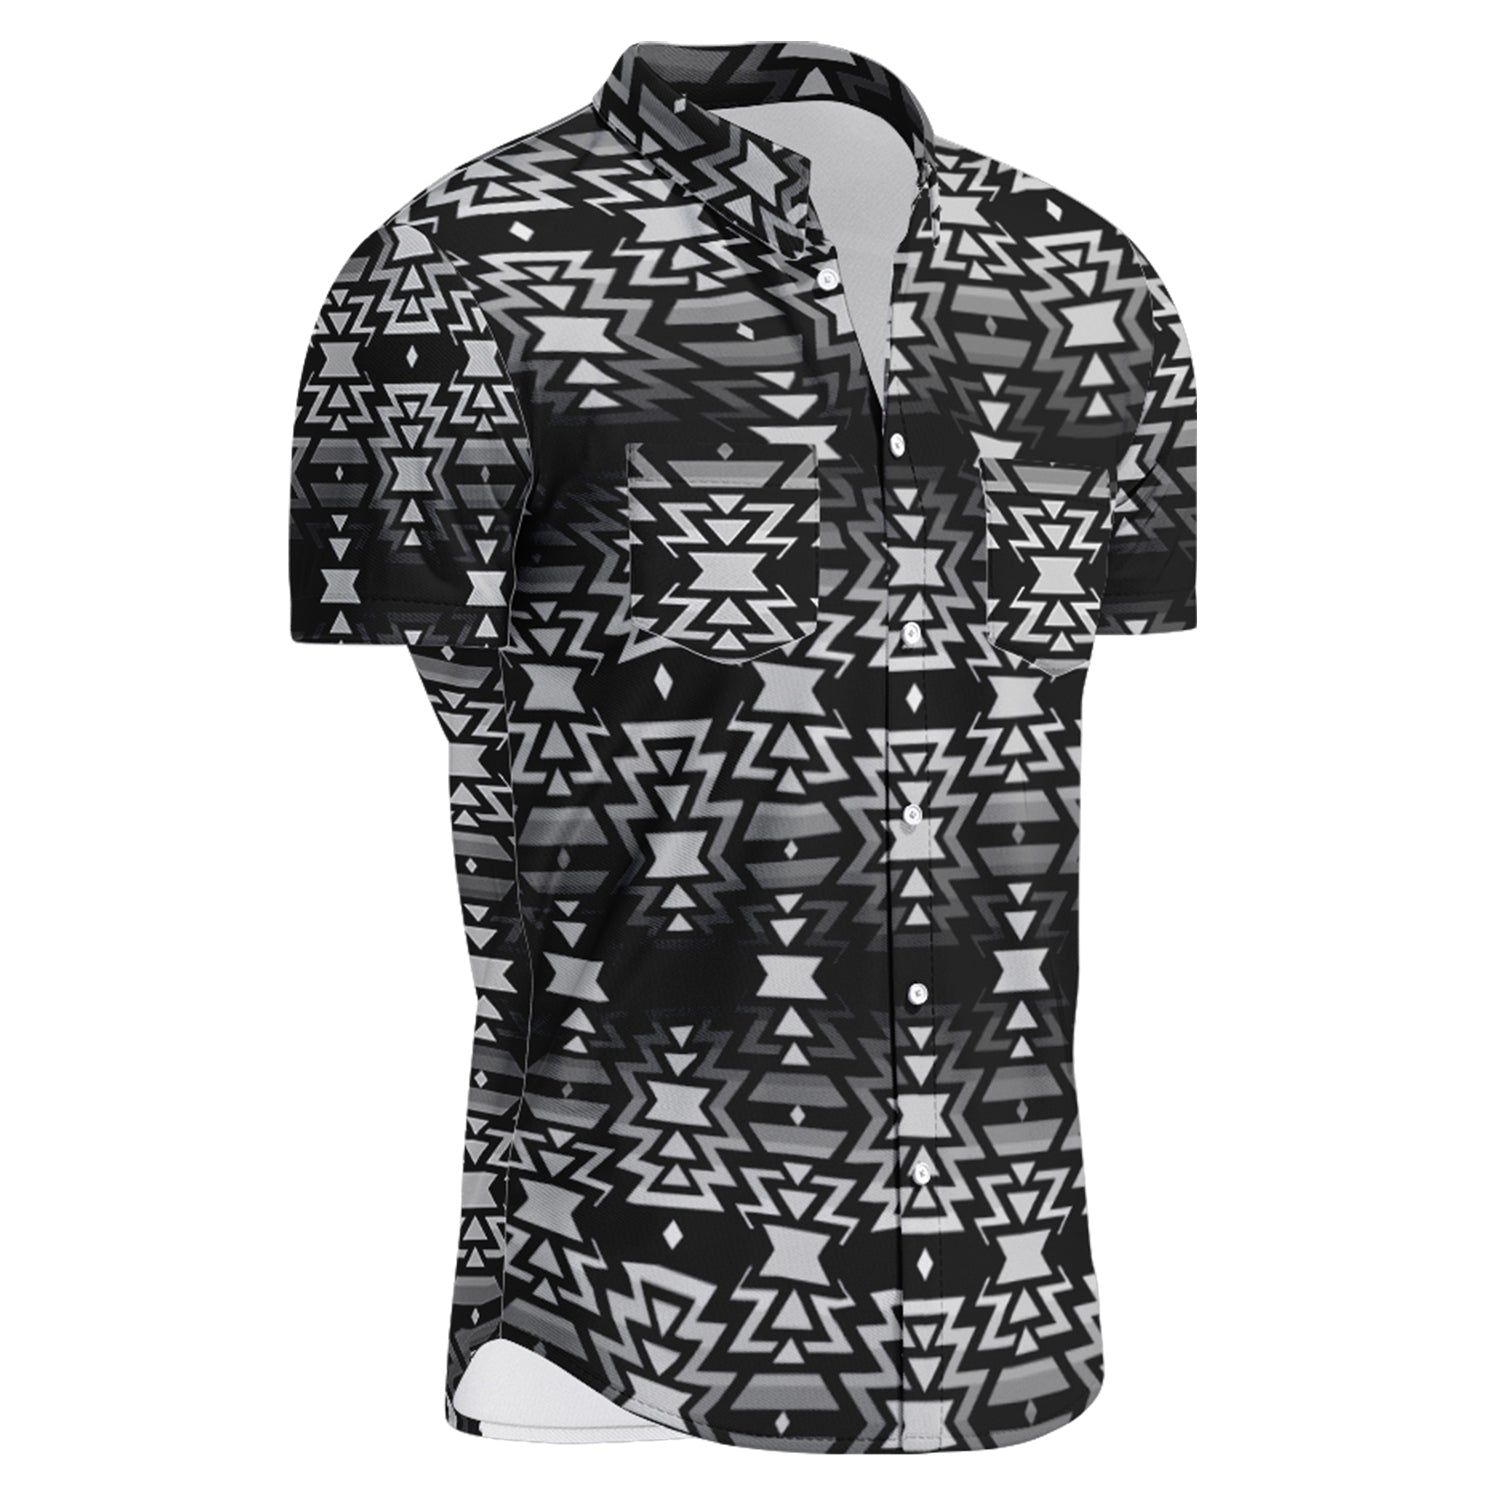 Black Fire Black and Gray Hawaiian-Style Button Up Shirt